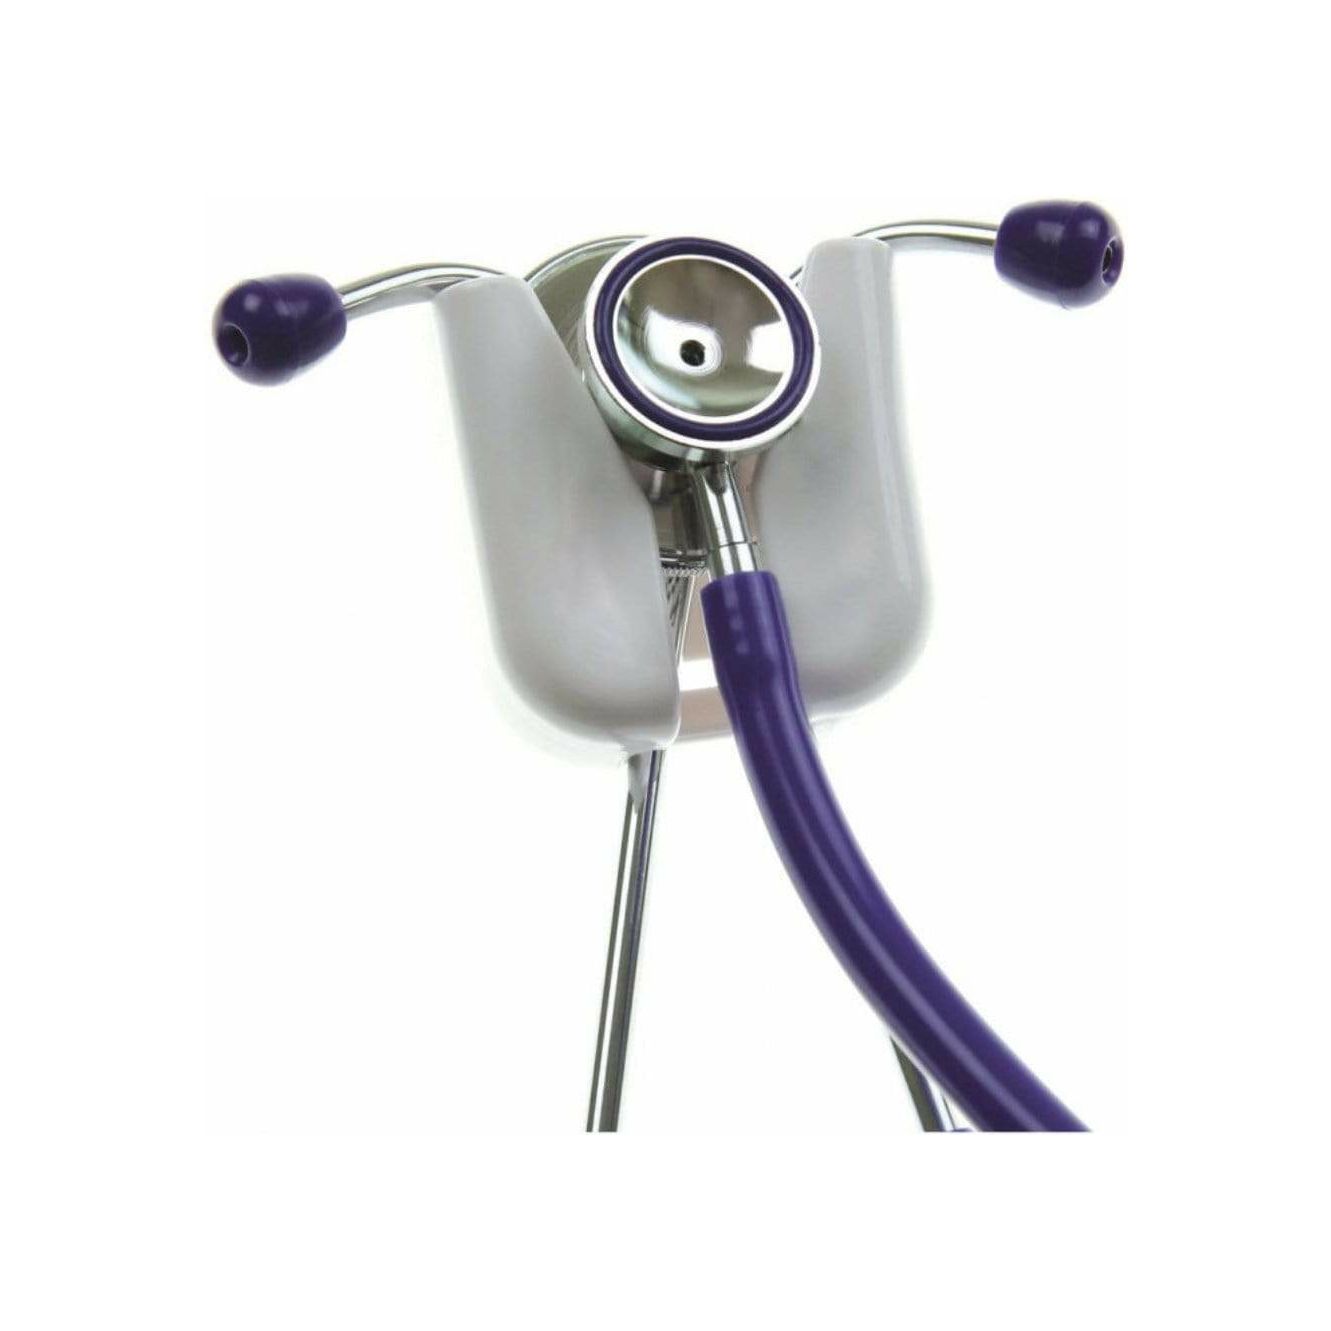 Paramedic Shop Axis Health Stethoscopes Liberty Hip Clip Stethoscope Holder